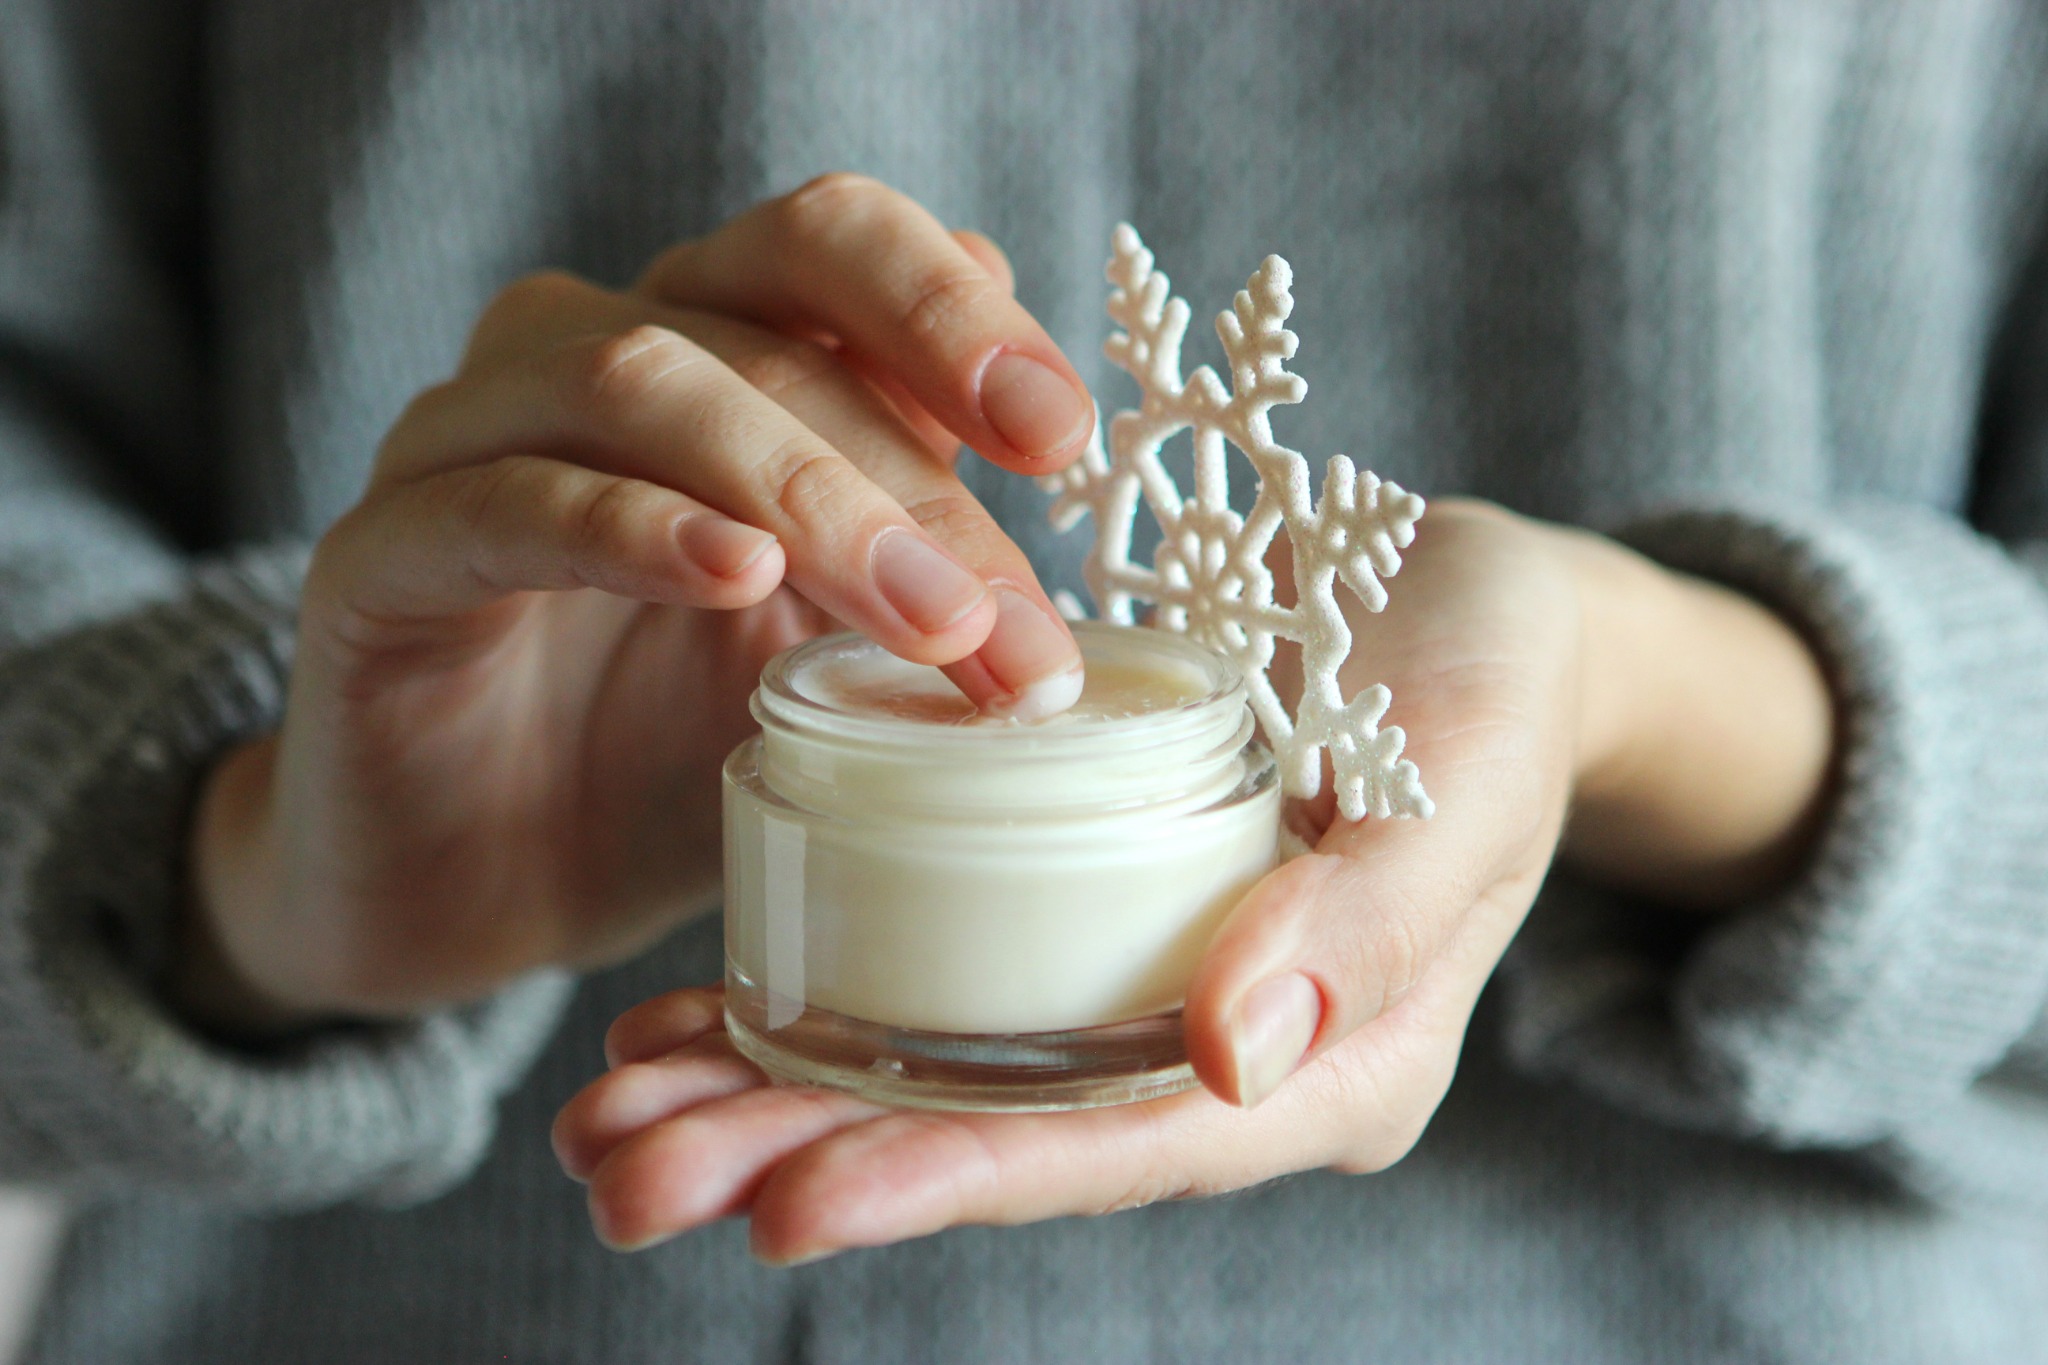 Image of woman's hands holding moisturizer and a snowflake to give concept of dry winter skin